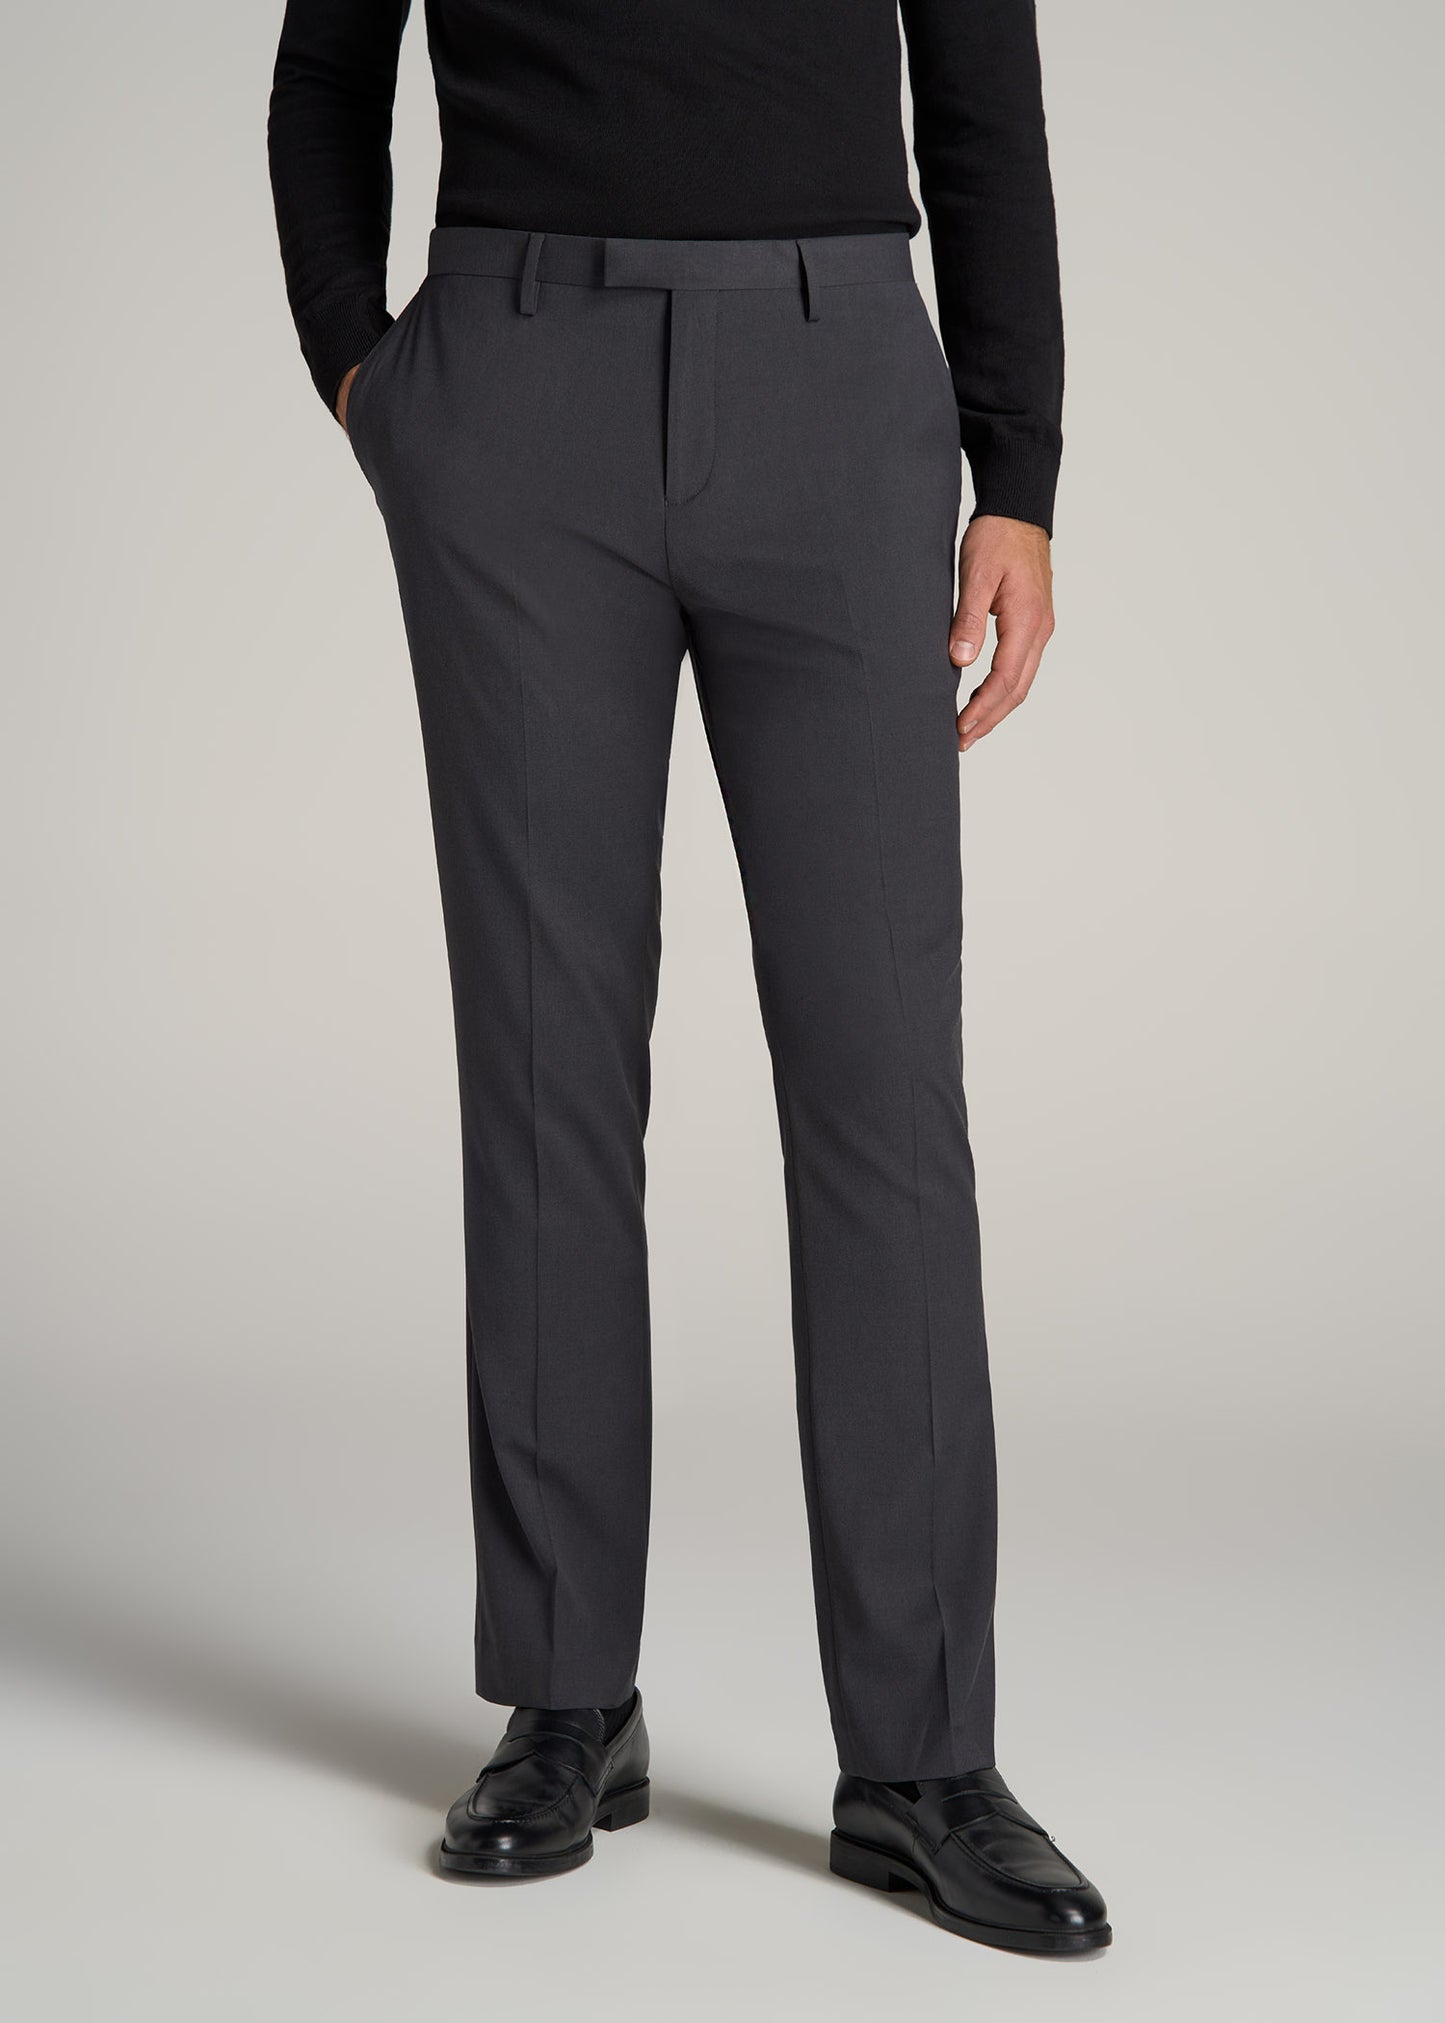 Tall Men's Mid Grey Suit Trousers